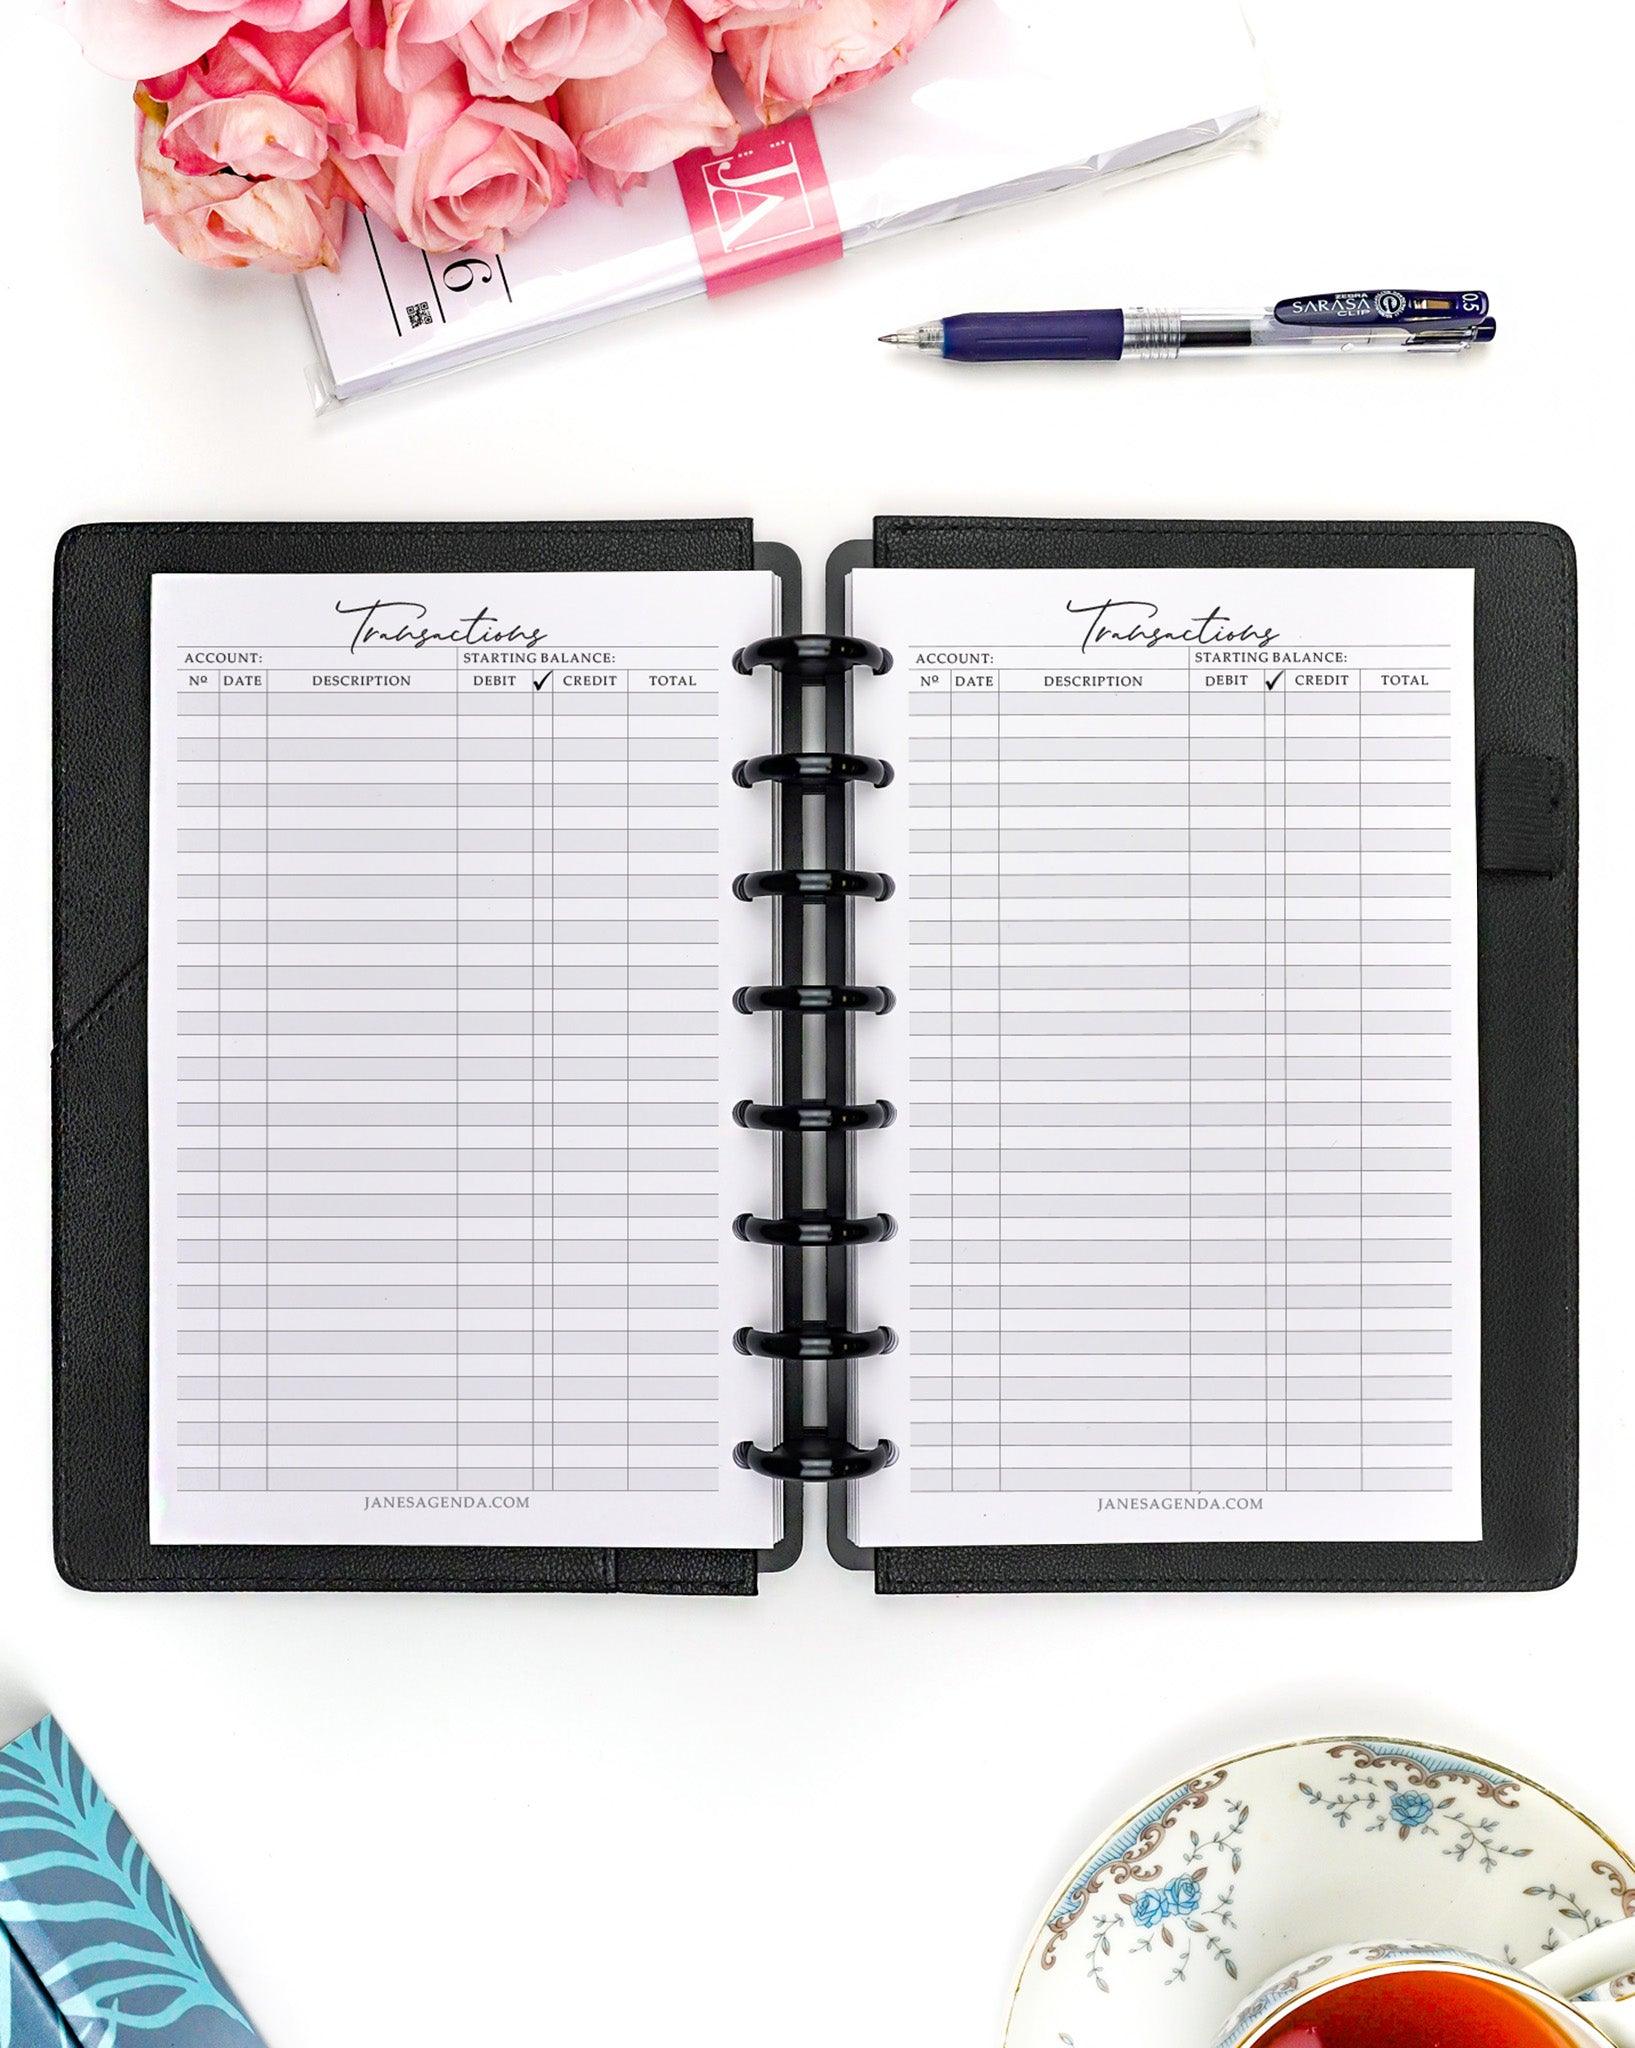 Transactions planner inserts refill pages for six ring and discbound planner systems by Jane's Agenda.